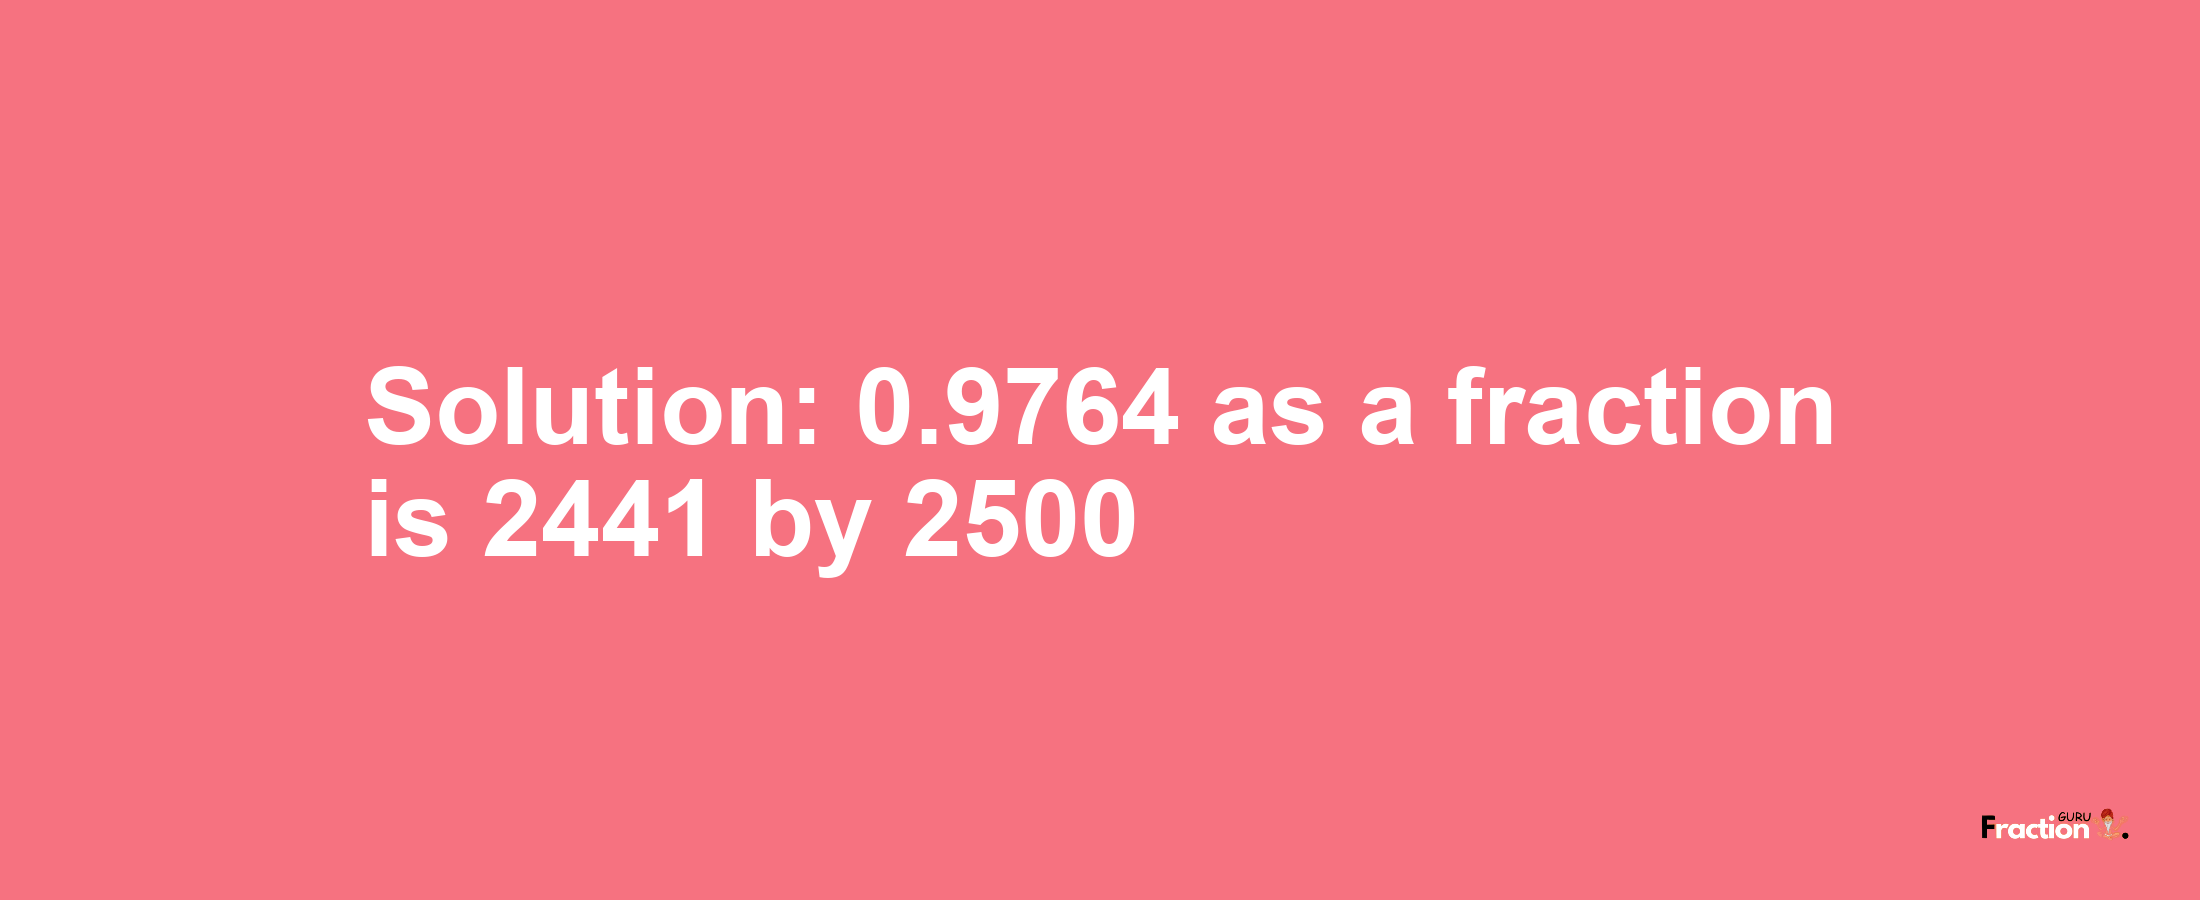 Solution:0.9764 as a fraction is 2441/2500